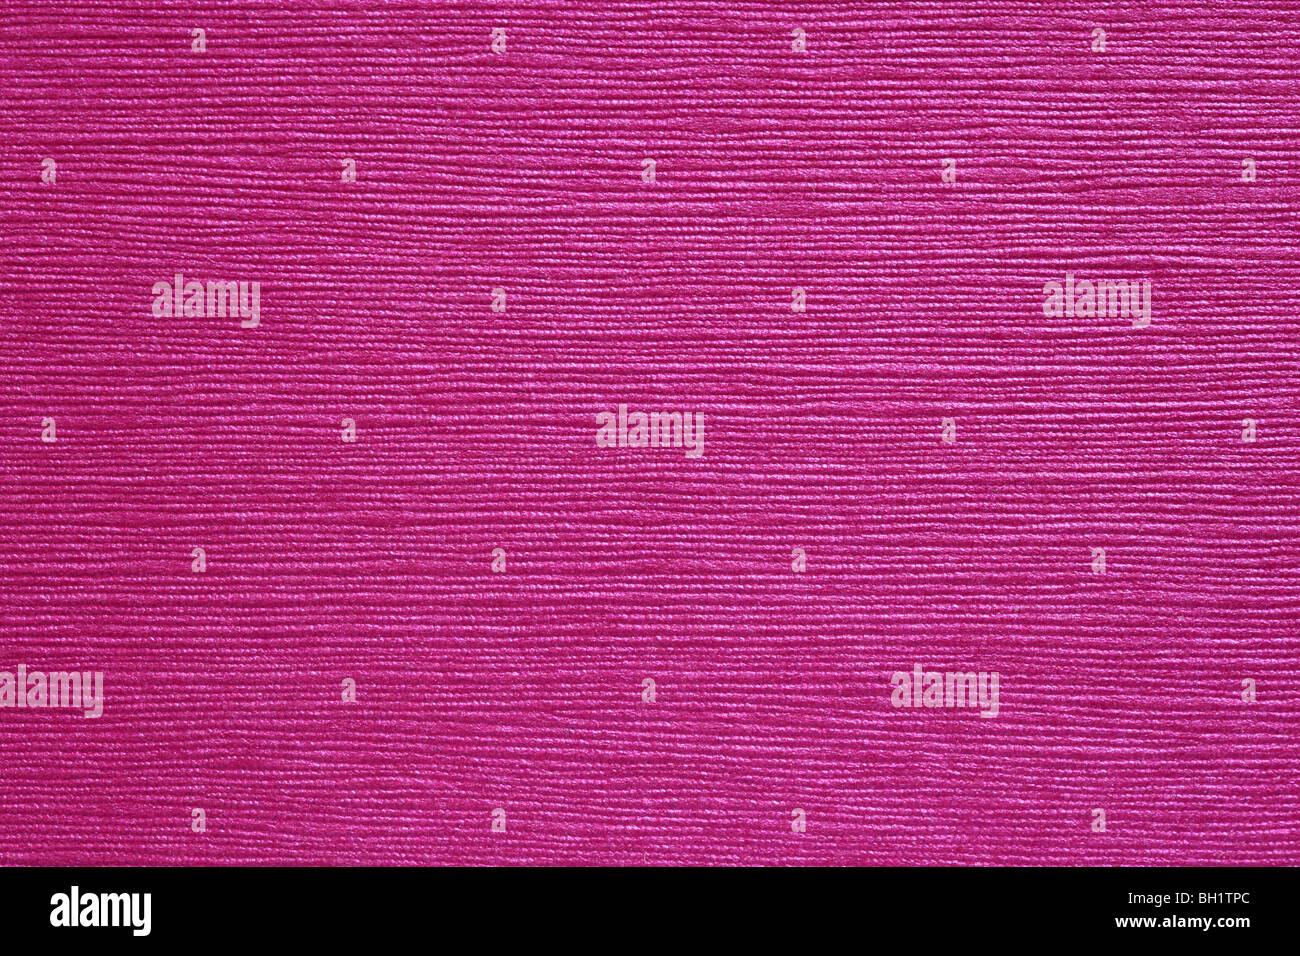 Pink paper texture Stock Photo